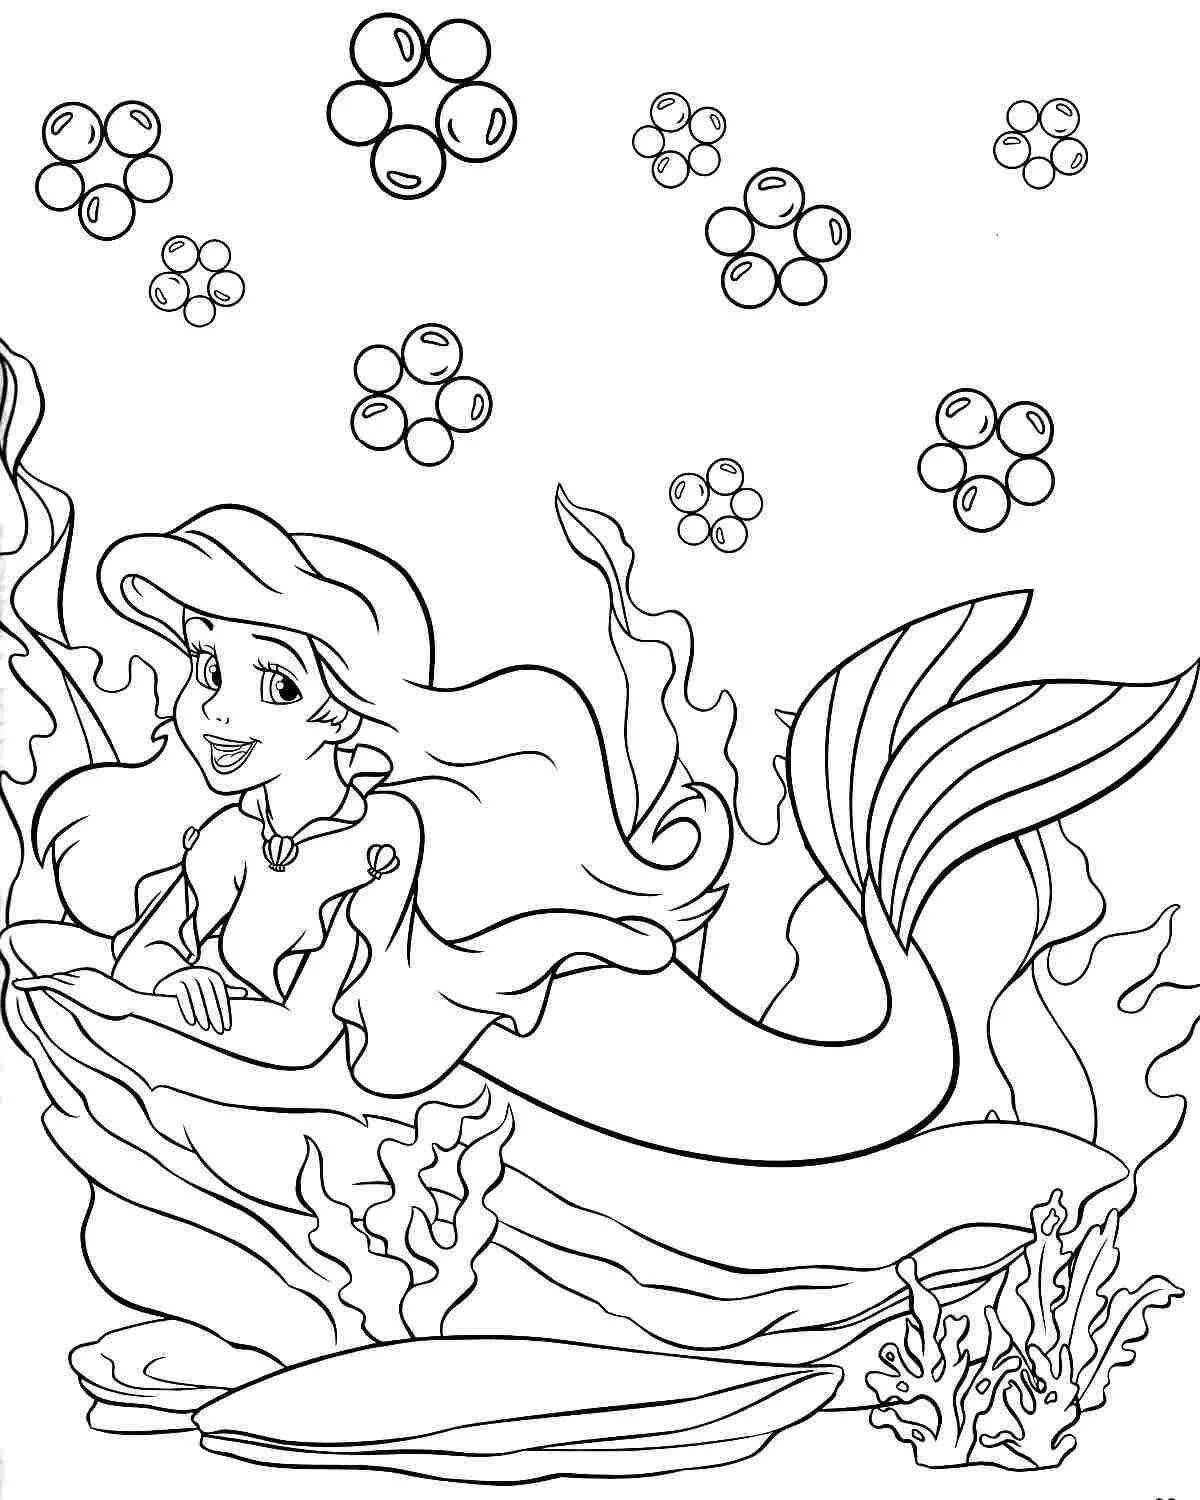 Radiant coloring page русалочка дисней